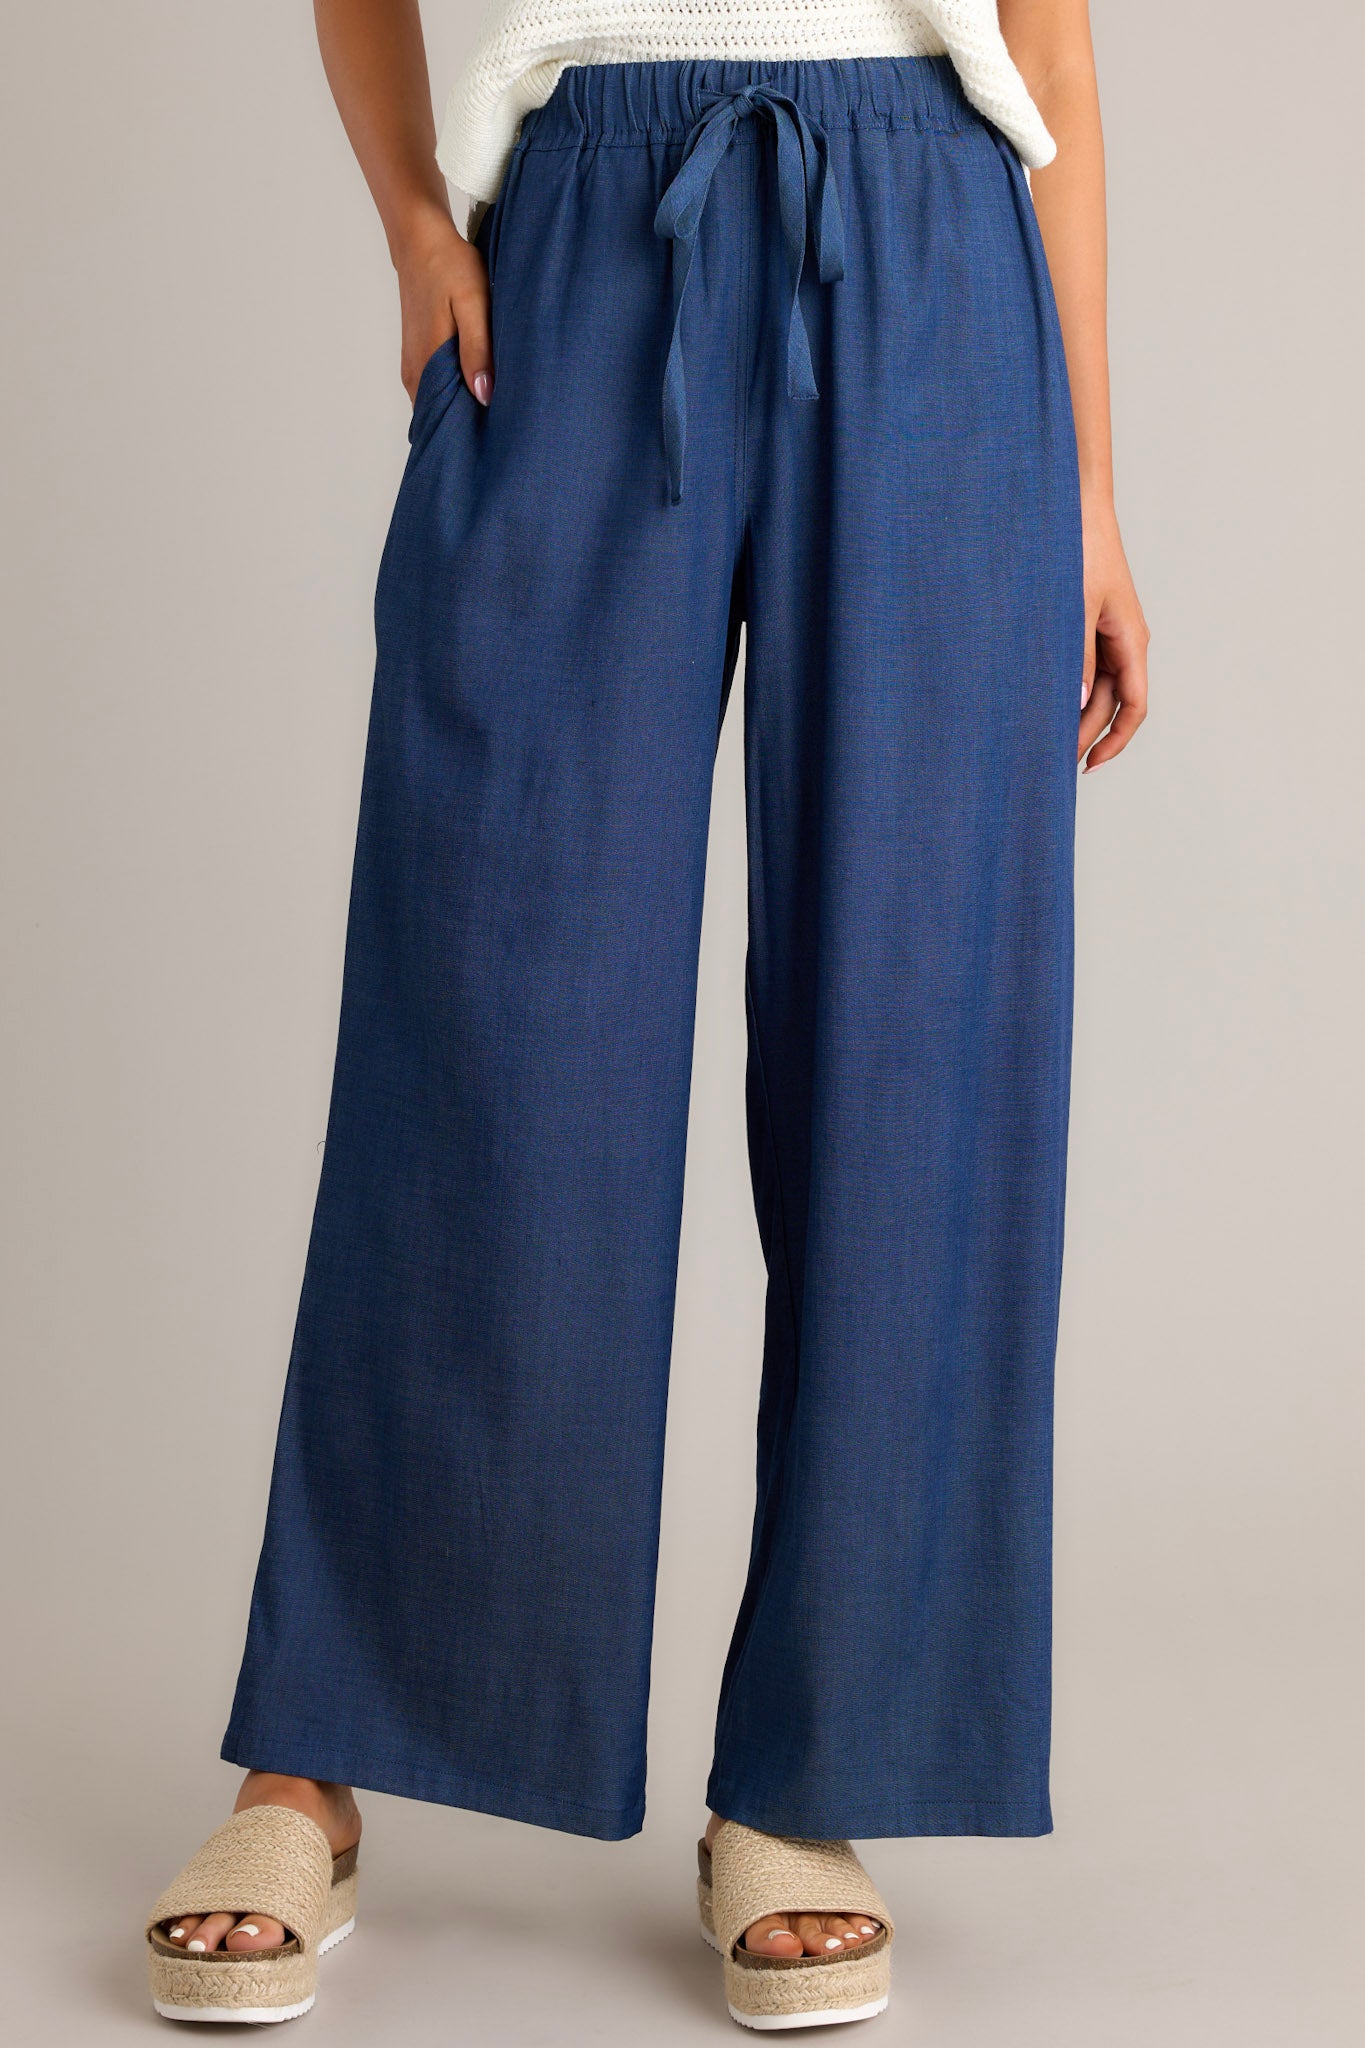 Front view of dark chambray pants featuring a high waisted design, an elastic waistband, a self-tie drawstring, functional hip pockets, and a wide leg.